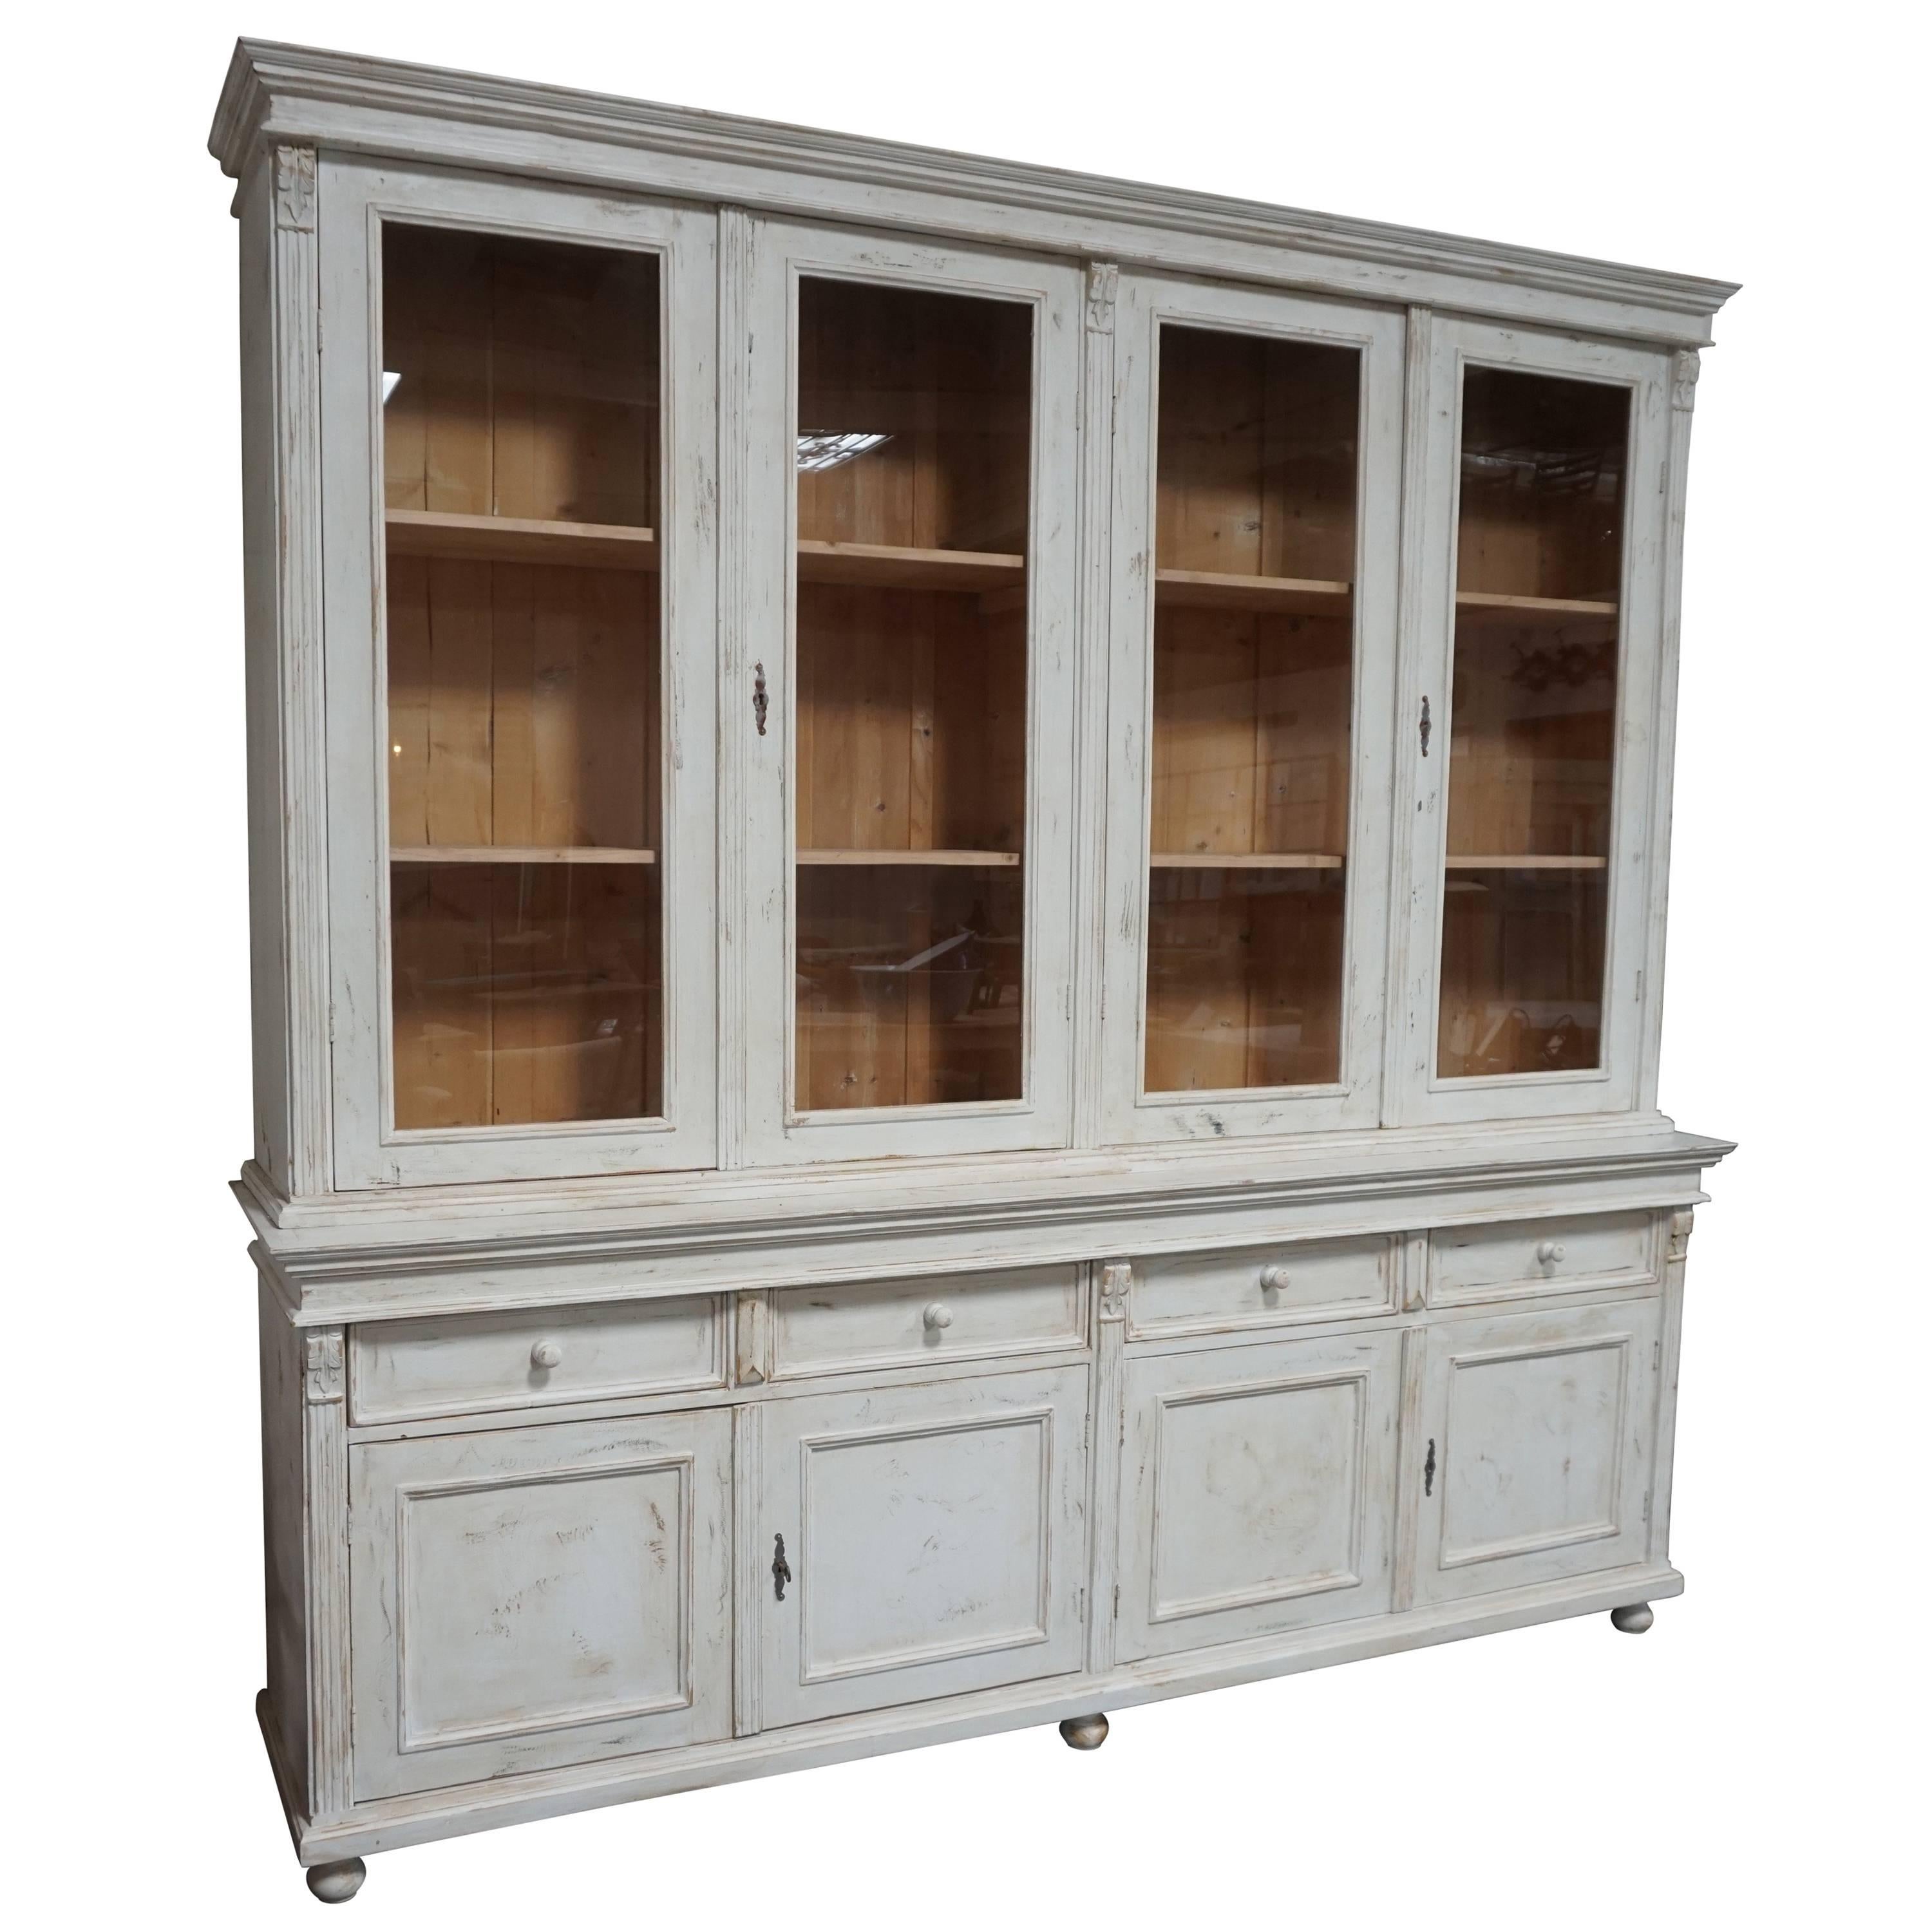 Huge Early 20th Century French Farmhouse Hutch